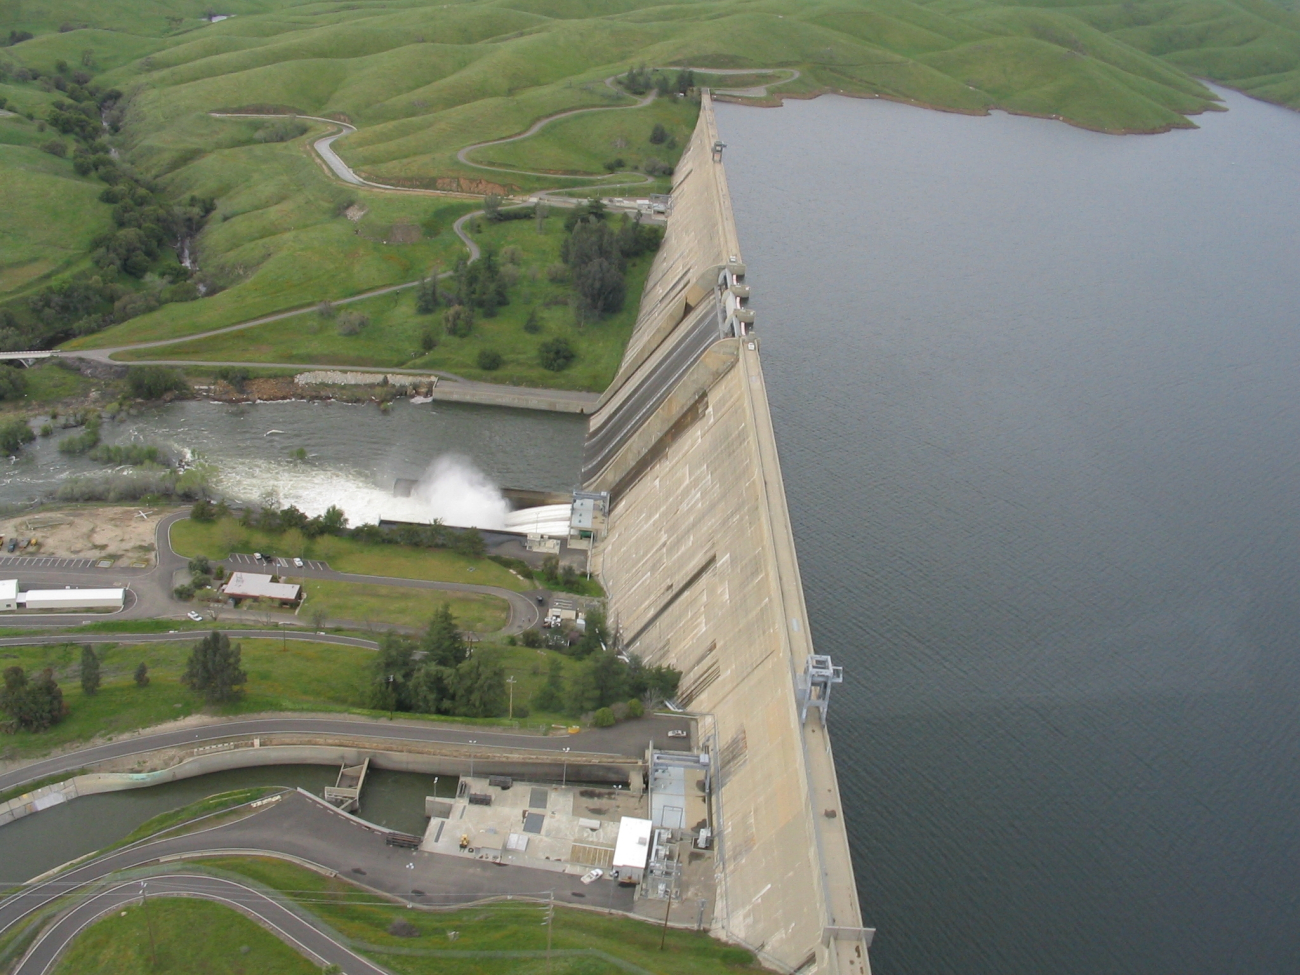 The Friant Dam, north of Fresno, filled to the top